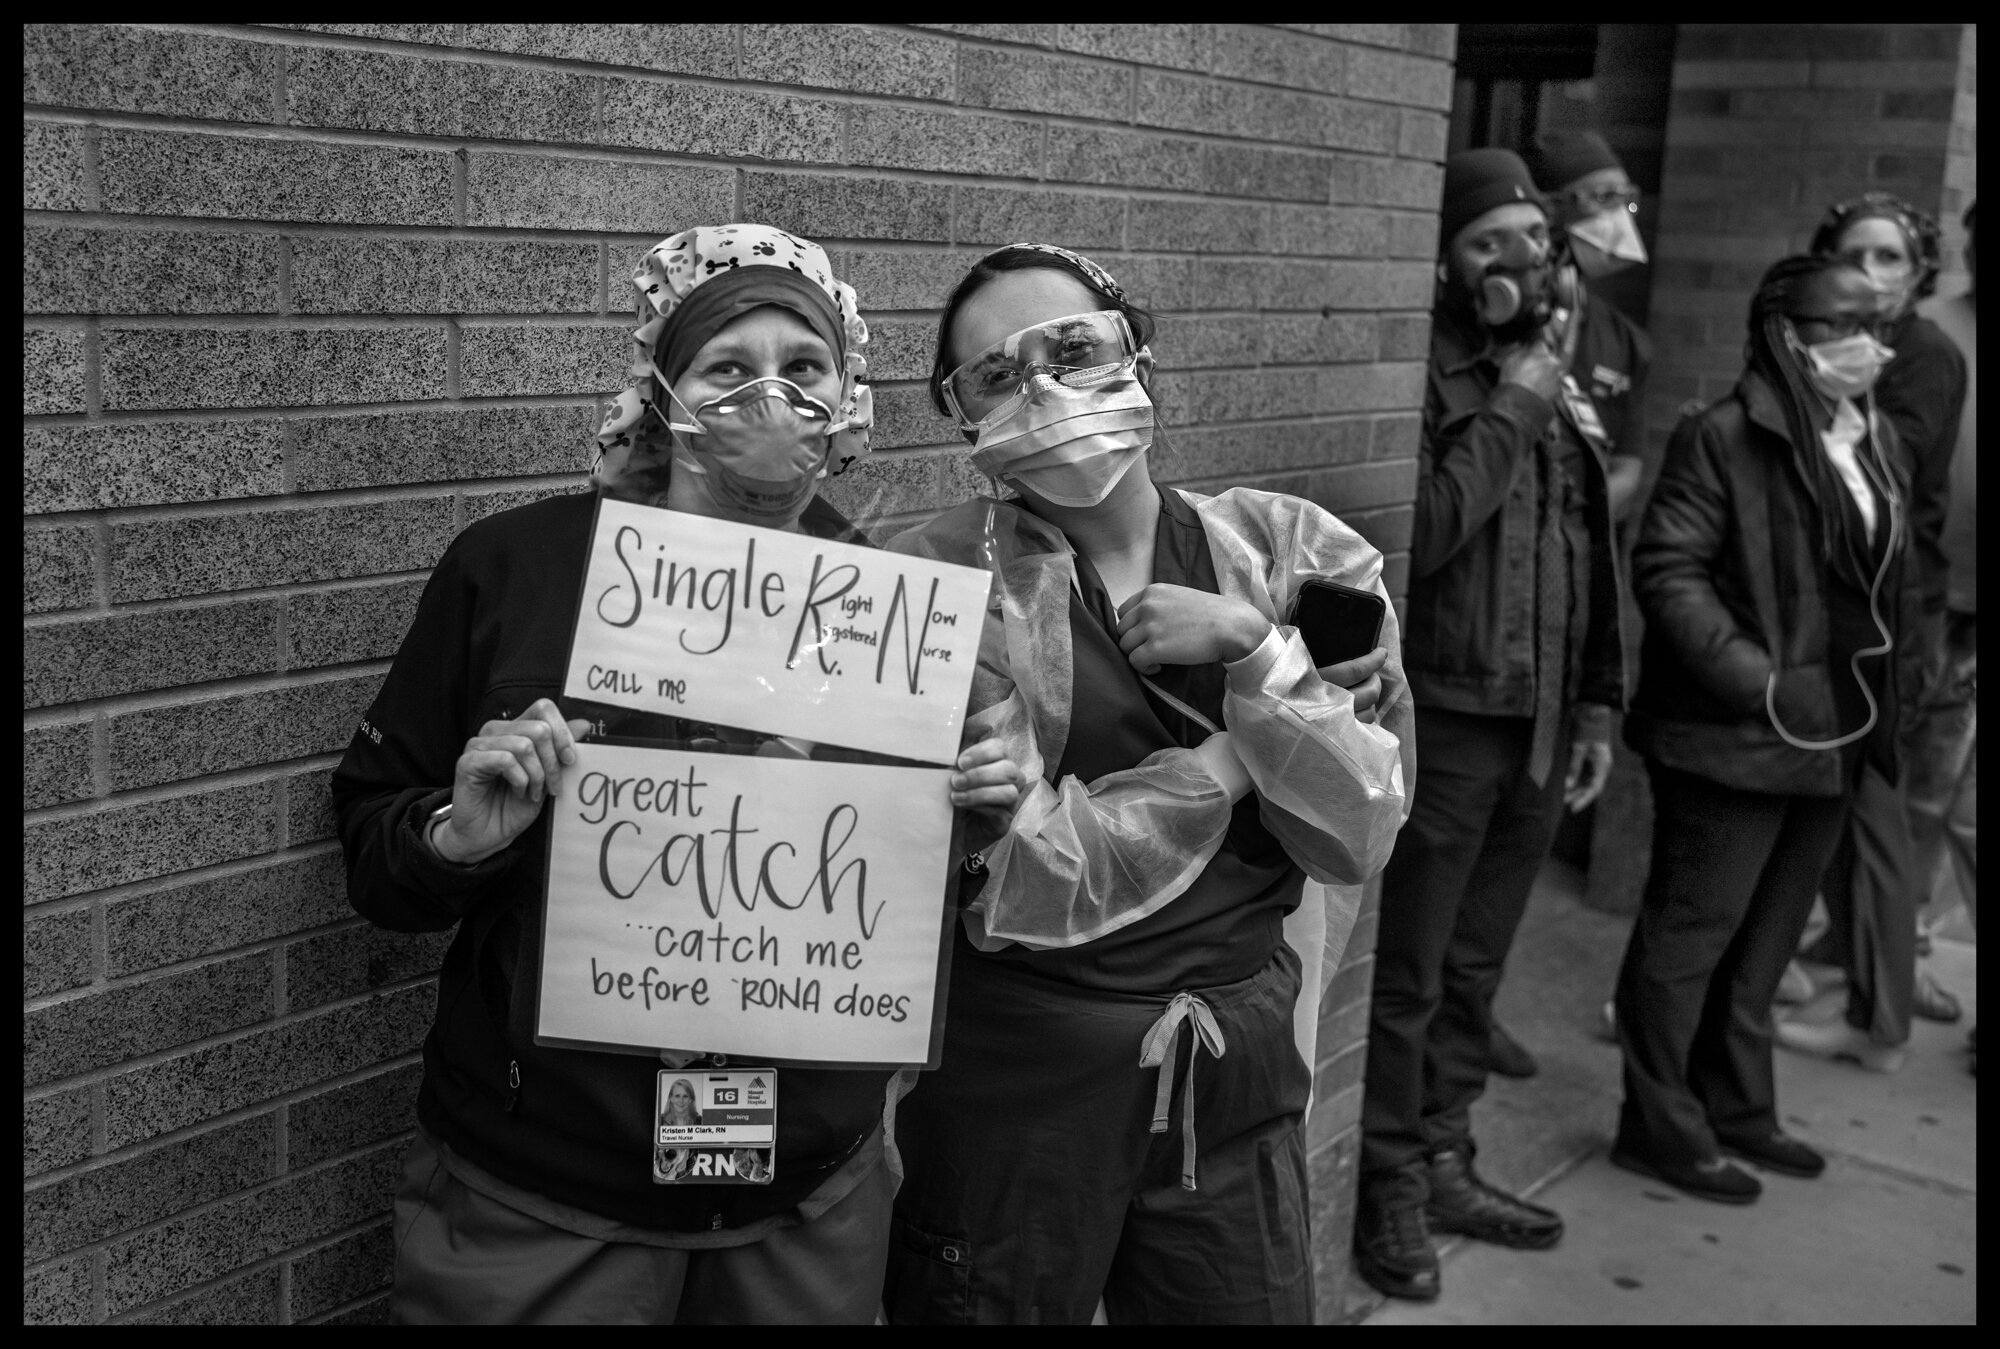  Two nurses from Mount Sinai Hospital who are currently working with Covid-19 patients, stand in front of the hospital at 7pm with a sign saying, “Single, Great Catch, catch me before Rona does”, as firemen with FDNY 43 Truck “El Barrio’s Bravest” st